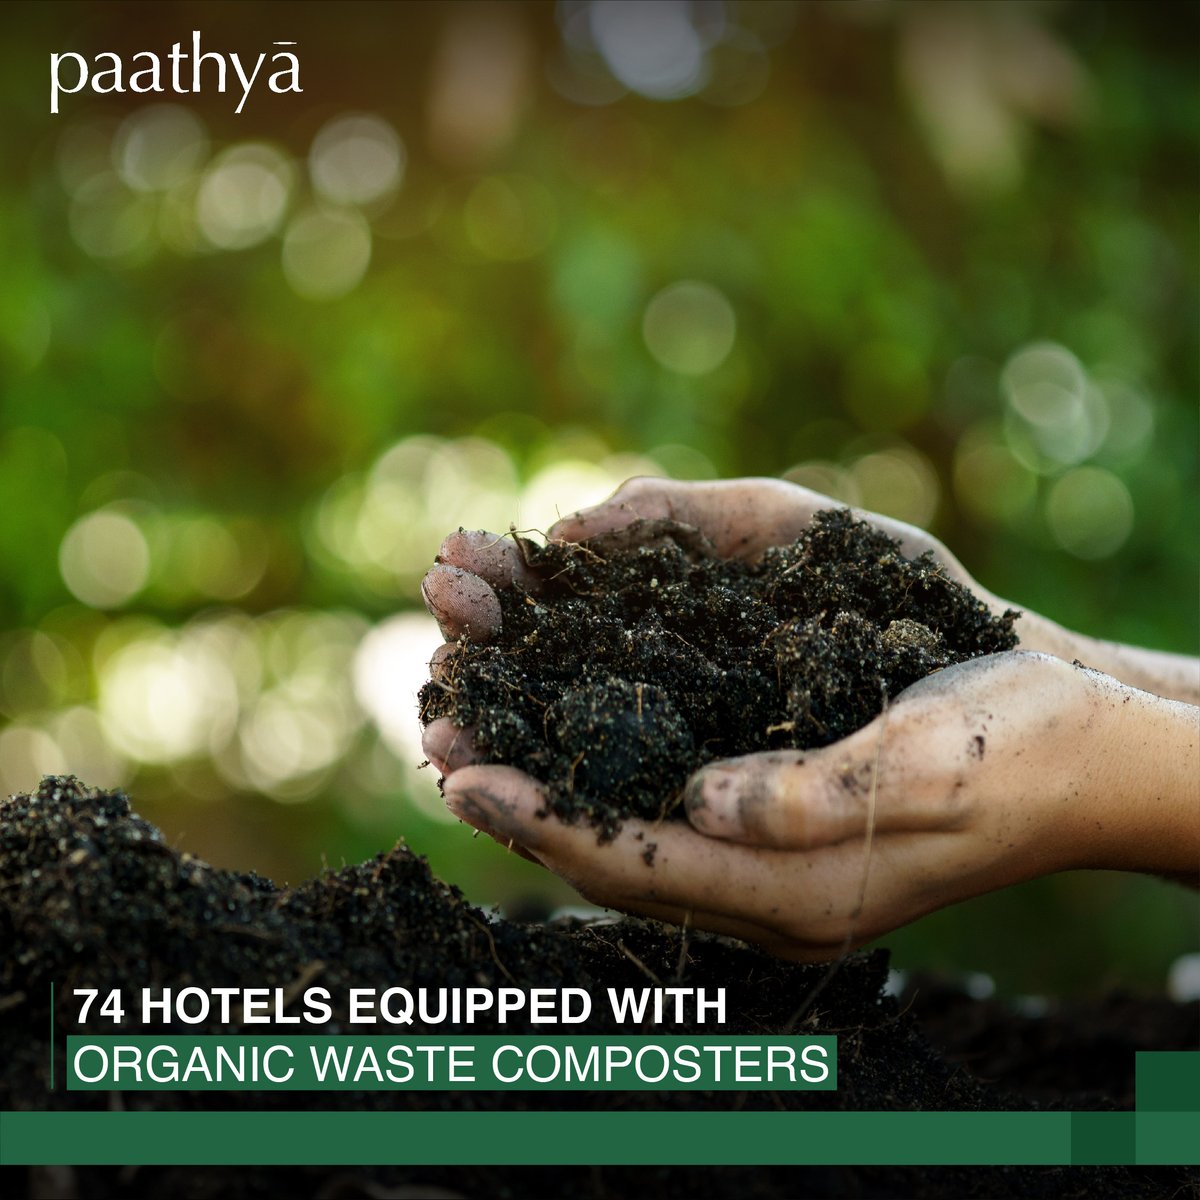 Under the Paathya framework, Indian Hotels Company is making immense strides in their efforts to effectively minimise waste generation across their properties. Here’s a look at our recent social media work encapsulating these initiatives.
#IHCL #Paathya #Sustainability